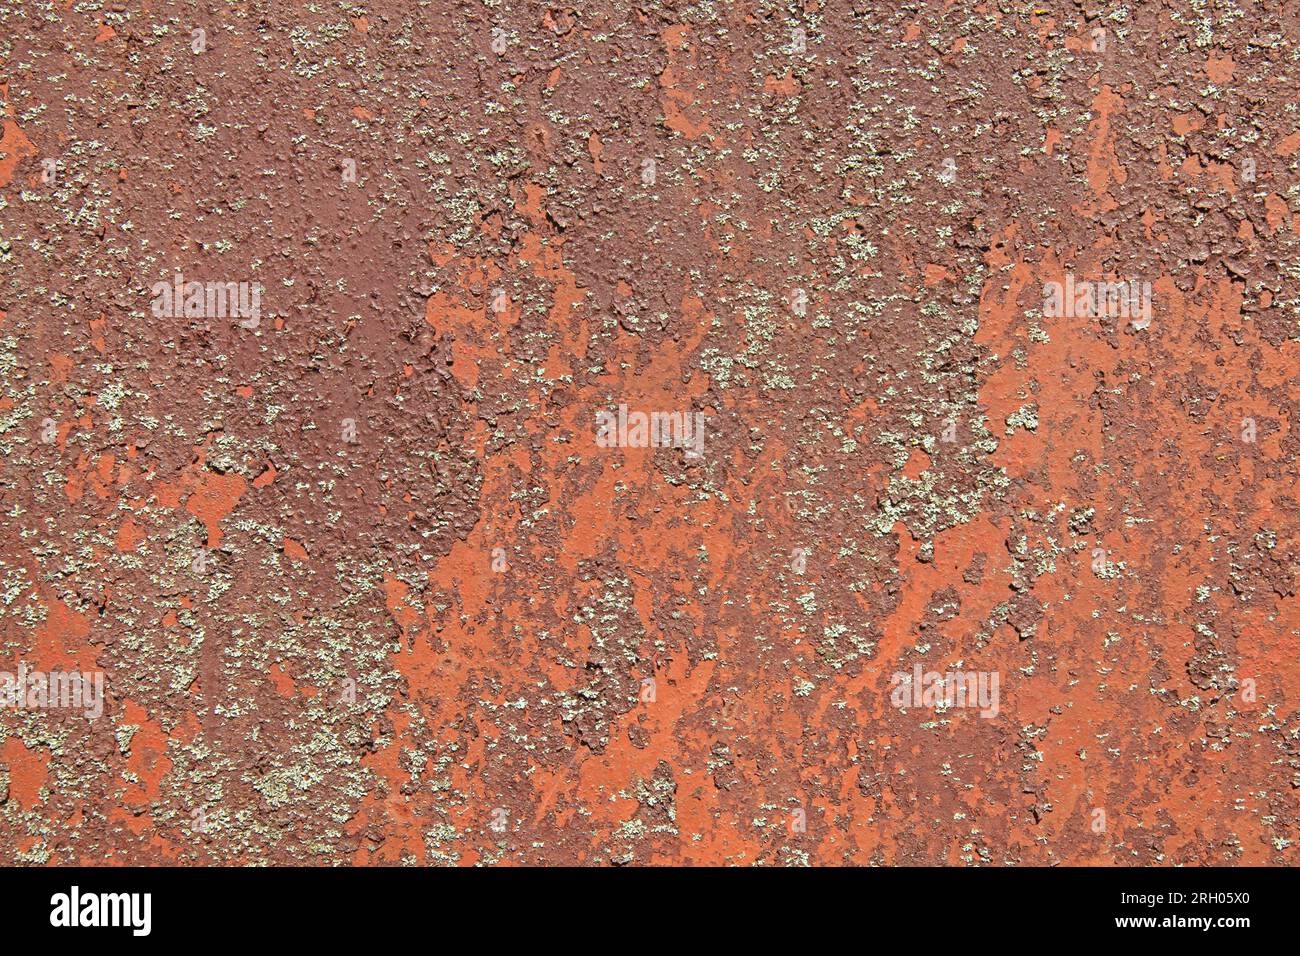 Rusted metallic background, texture. An old red and rusty surface with faded uneven color. Abstract rust pattern on light-brown metal surface Stock Photo